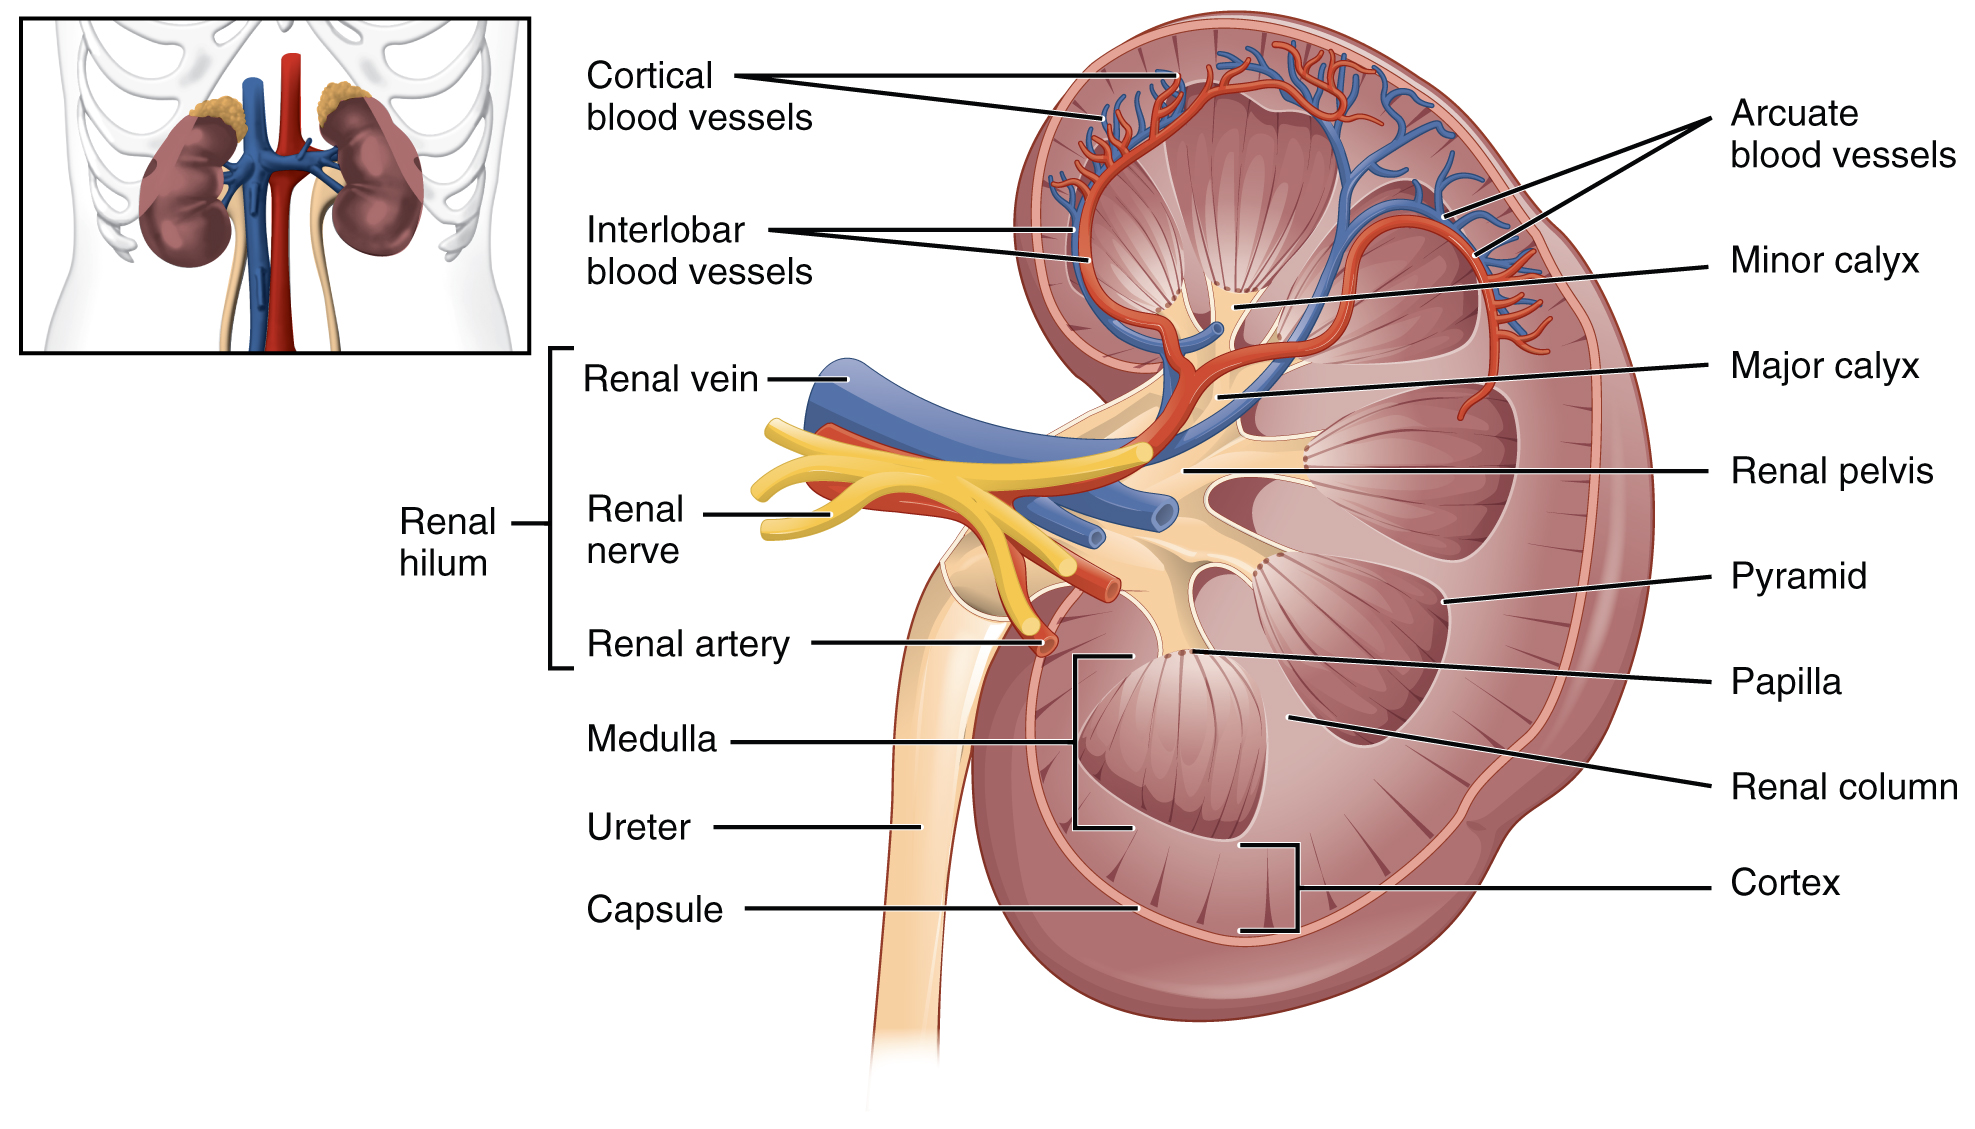 The left panel of this figure shows the location of the kidneys in the abdomen. The right panel shows the cross section of the kidney.